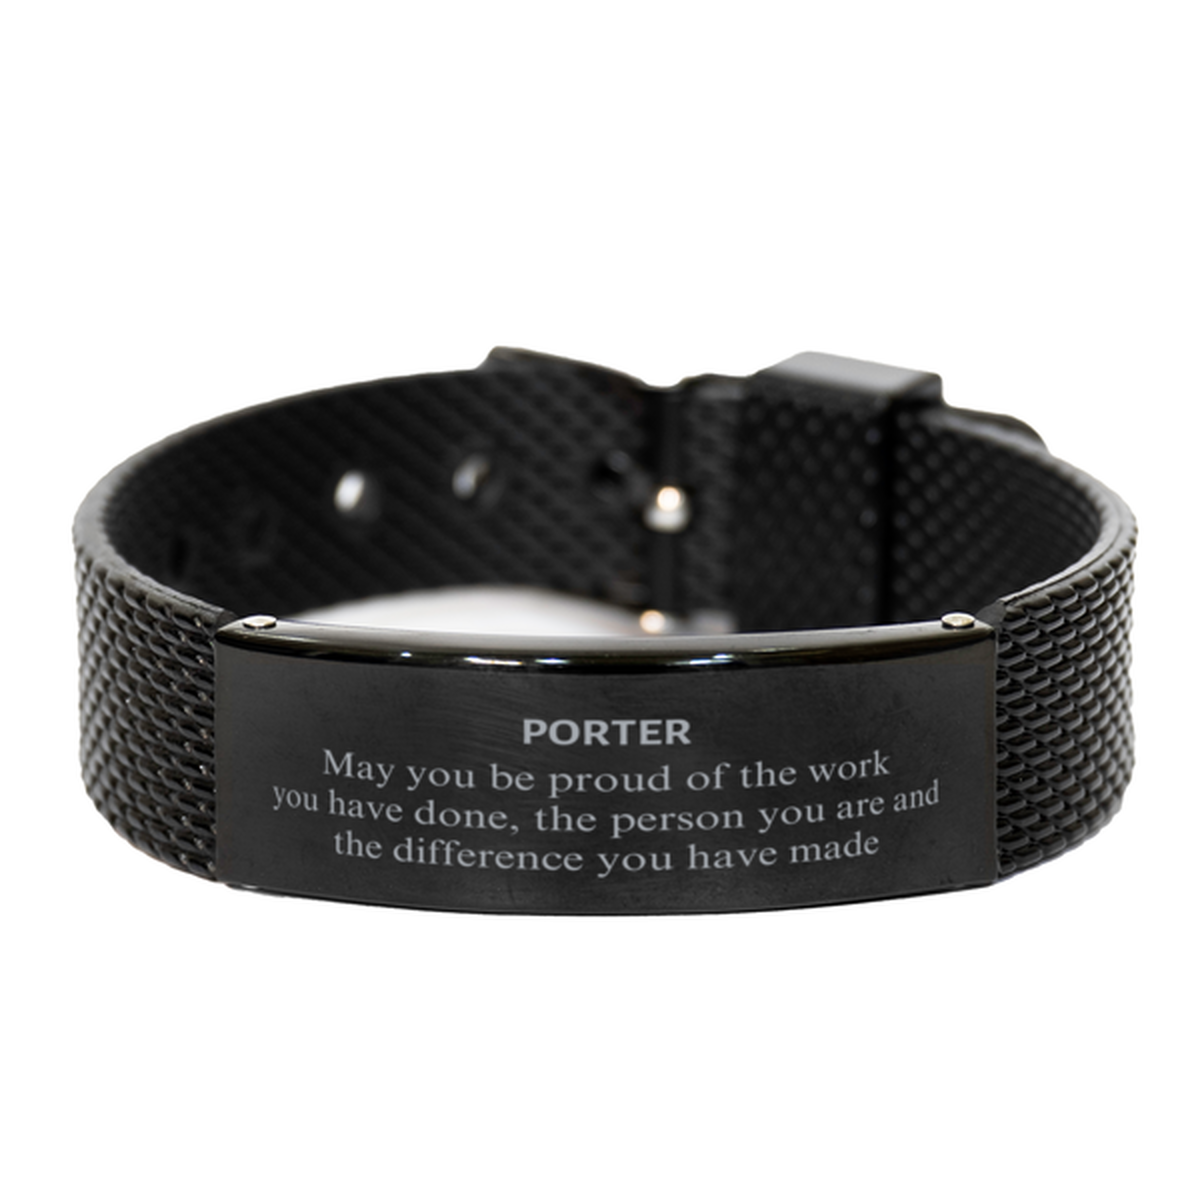 Porter May you be proud of the work you have done, Retirement Porter Black Shark Mesh Bracelet for Colleague Appreciation Gifts Amazing for Porter